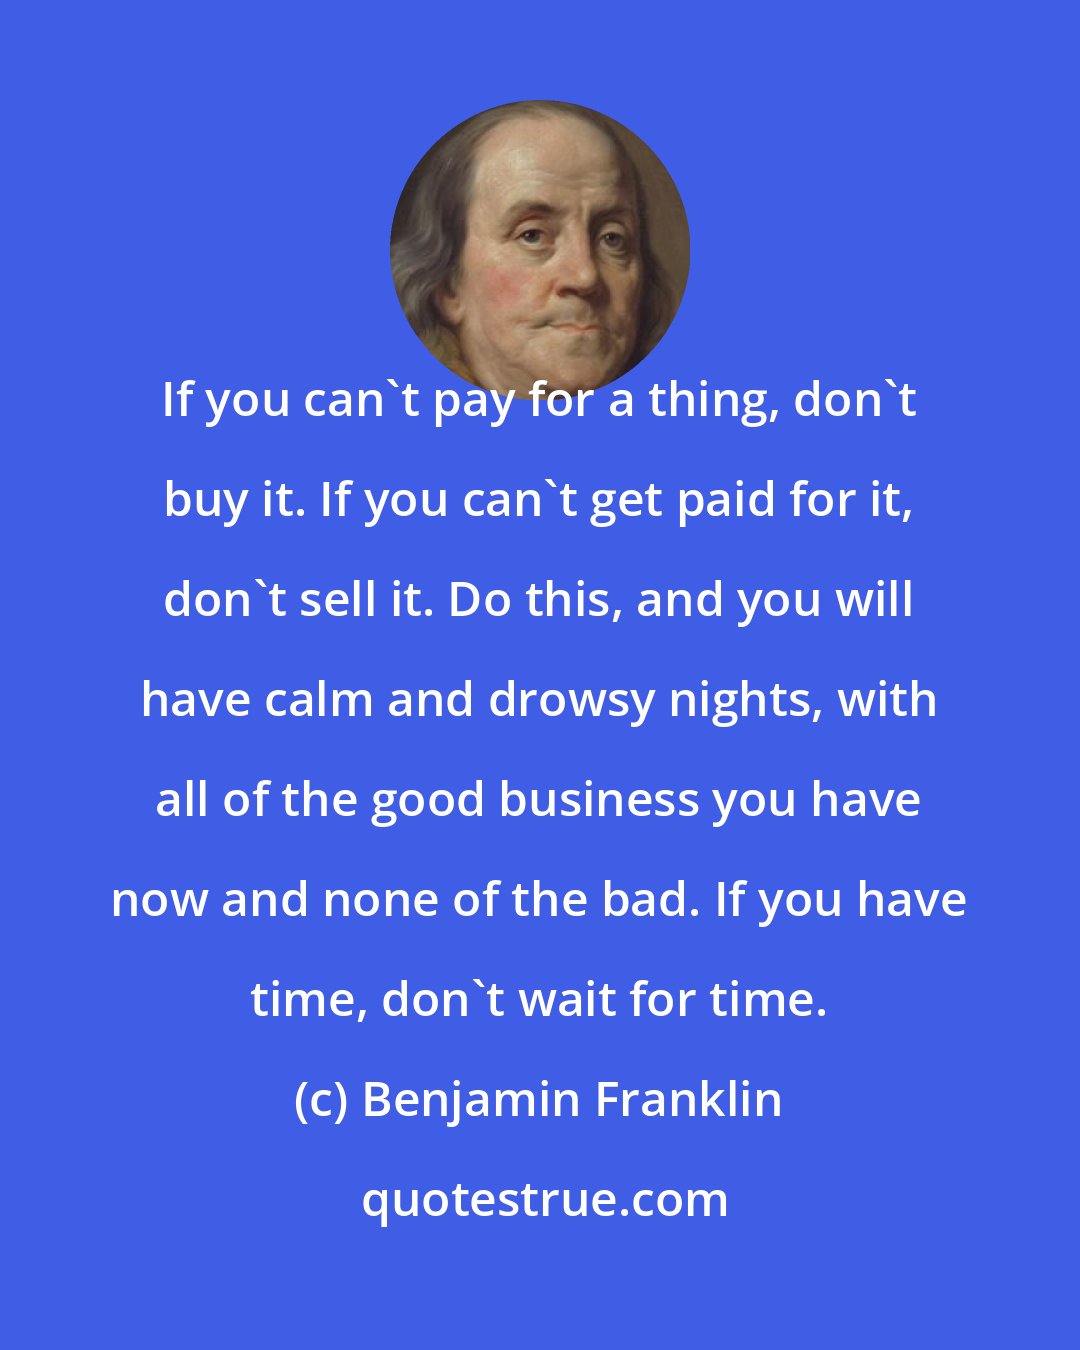 Benjamin Franklin: If you can't pay for a thing, don't buy it. If you can't get paid for it, don't sell it. Do this, and you will have calm and drowsy nights, with all of the good business you have now and none of the bad. If you have time, don't wait for time.